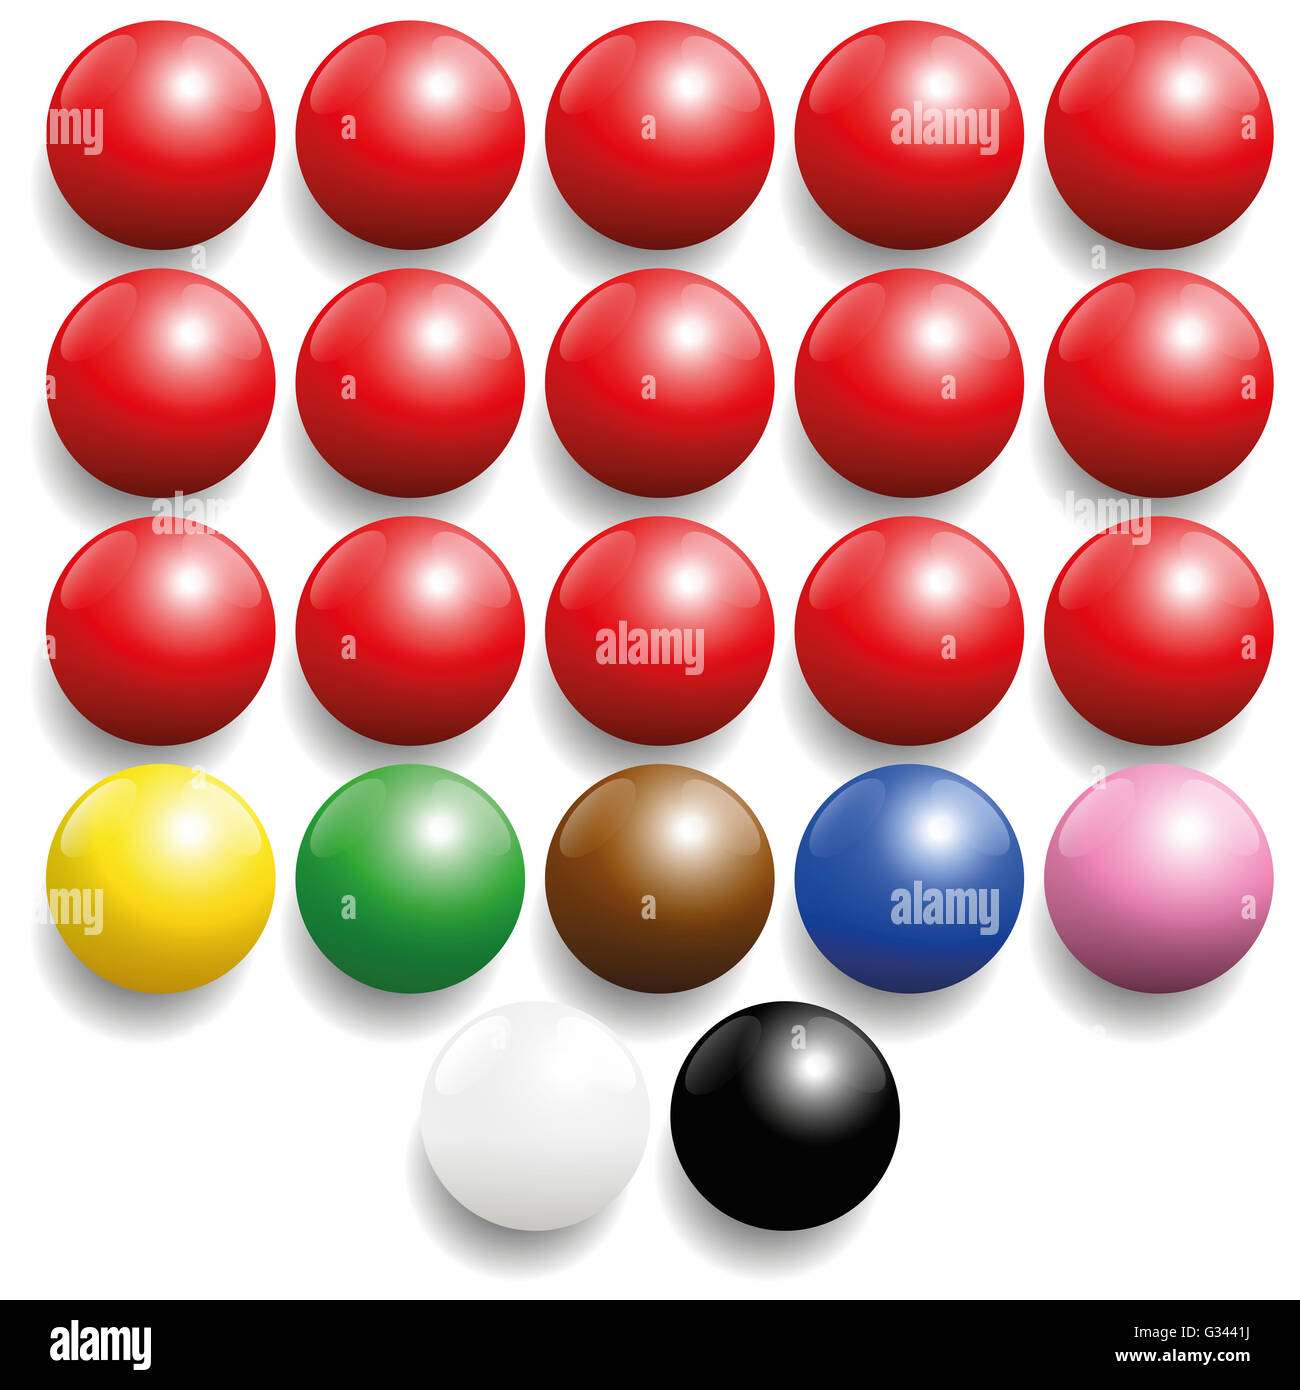 Snooker balls set - commonly used colors. Three-dimensional illustration on white background. Stock Photo